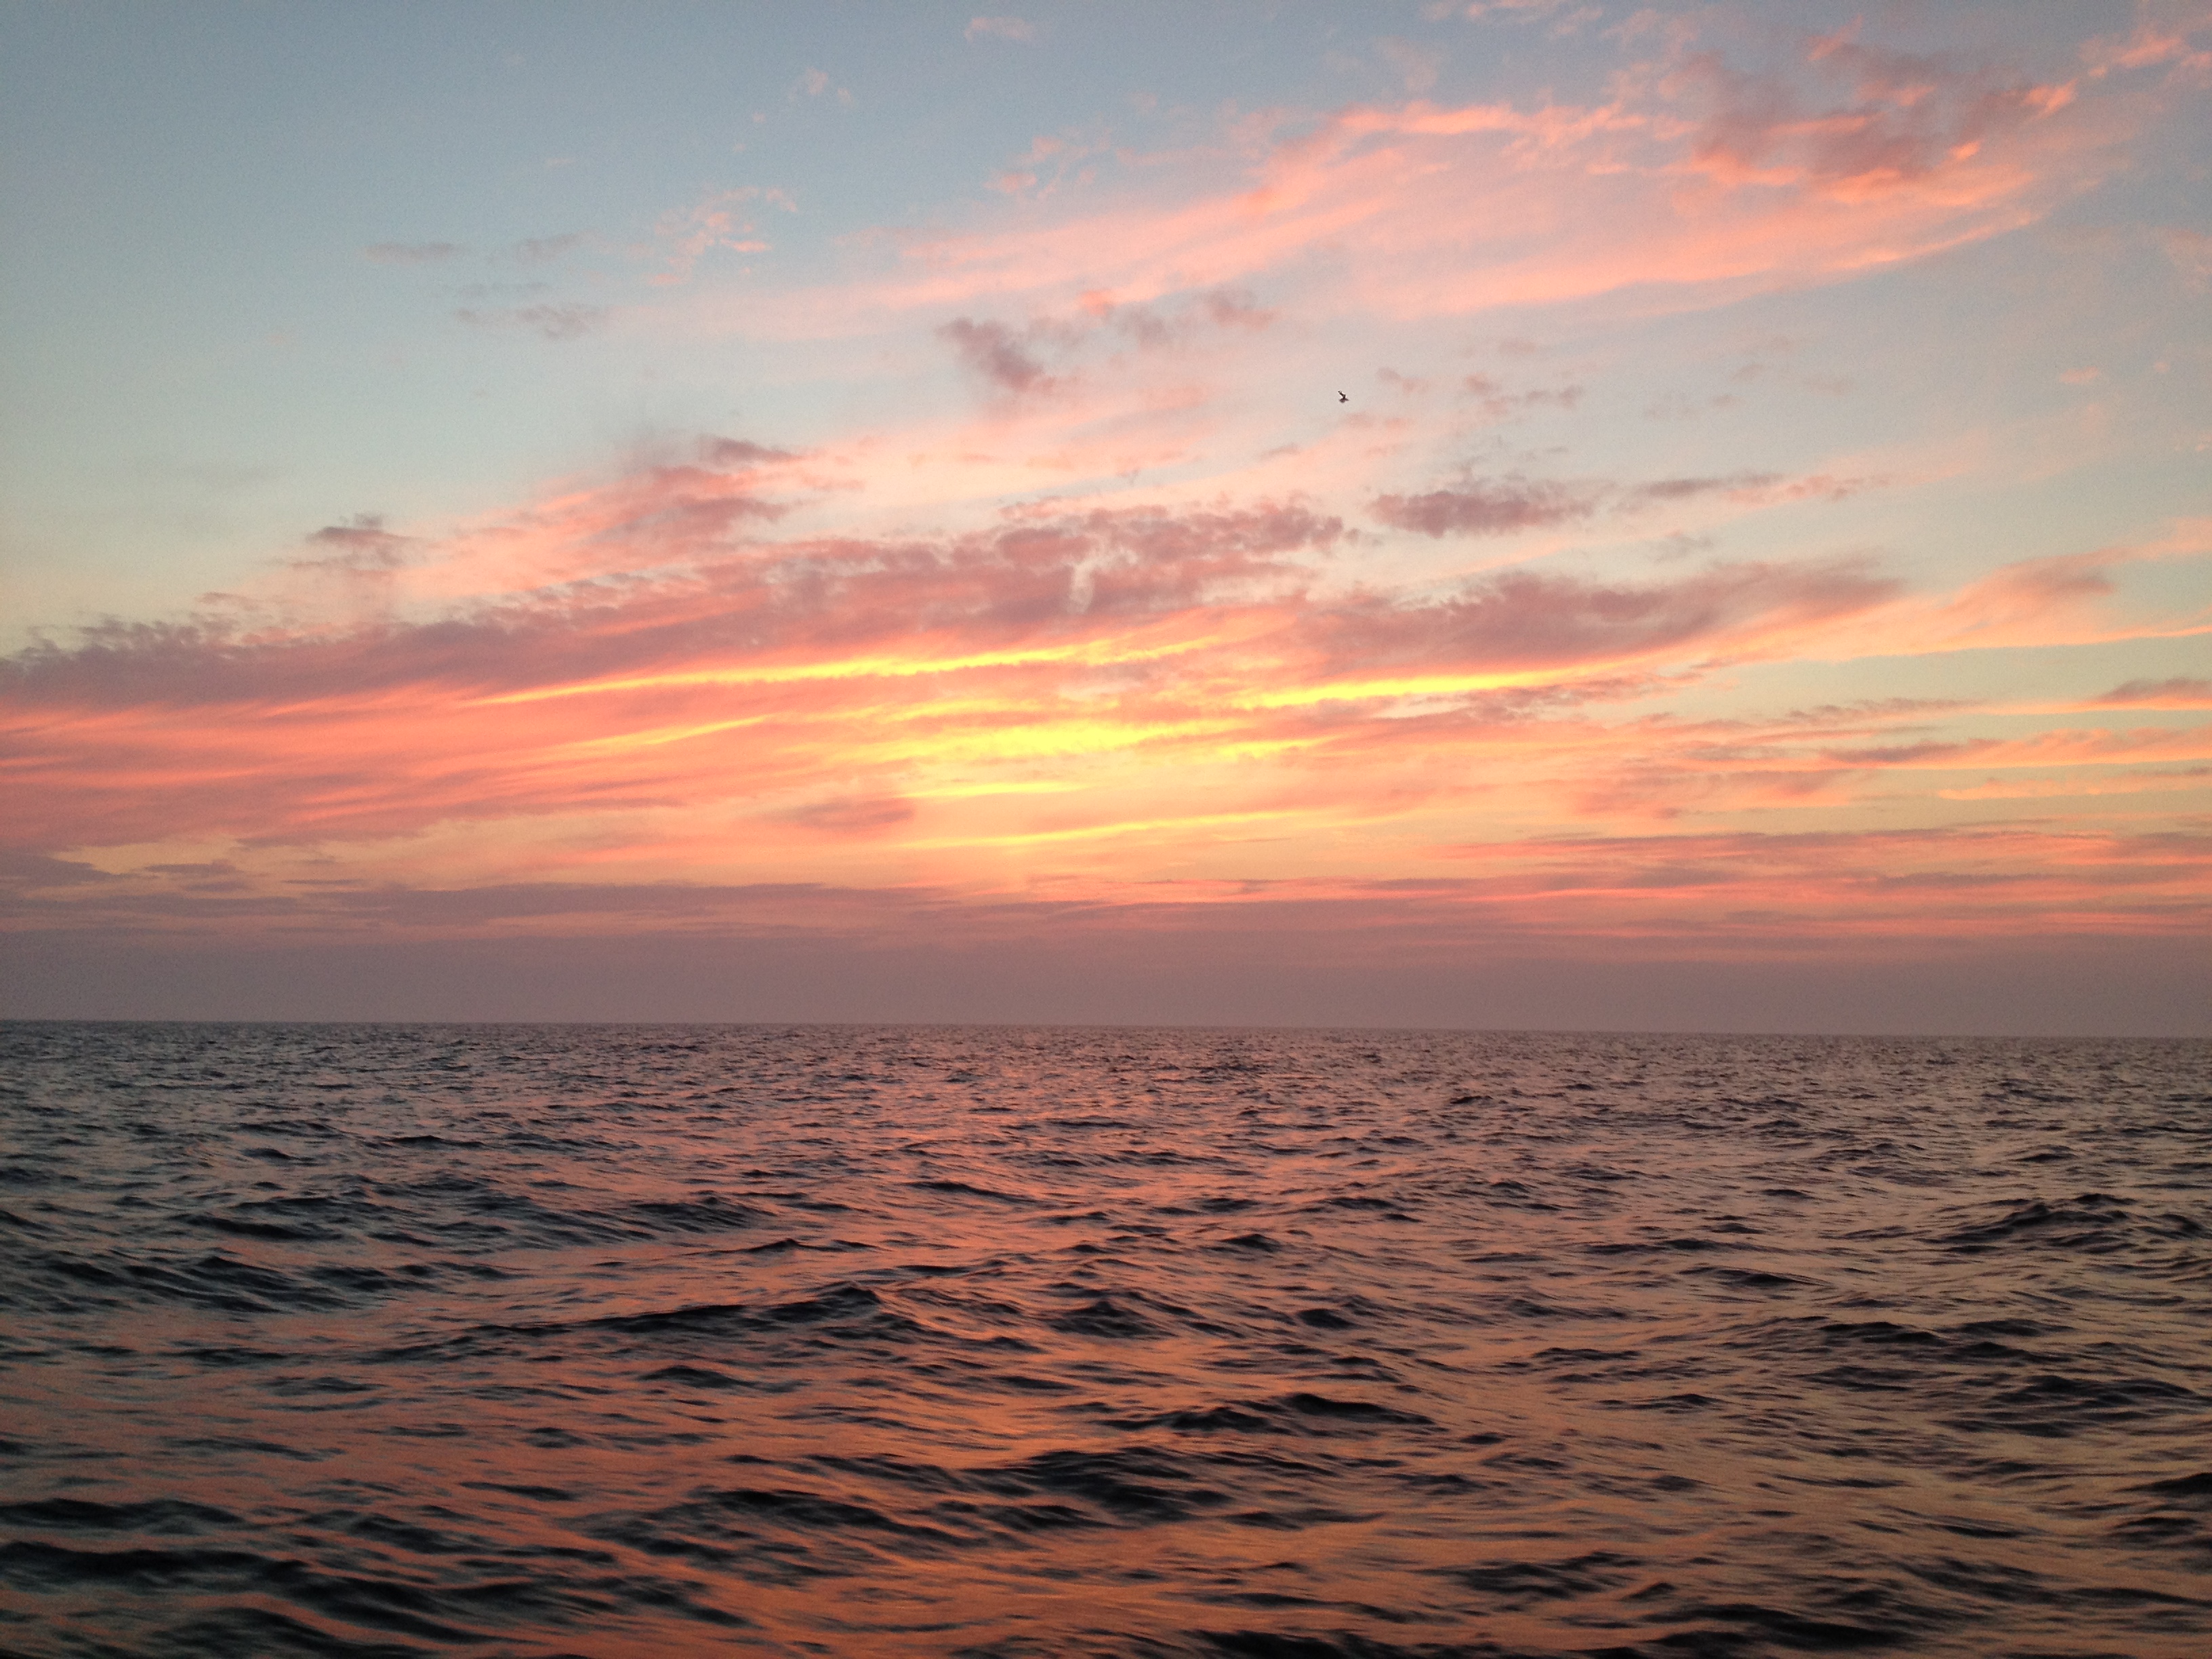 Earth Day sunset at sea